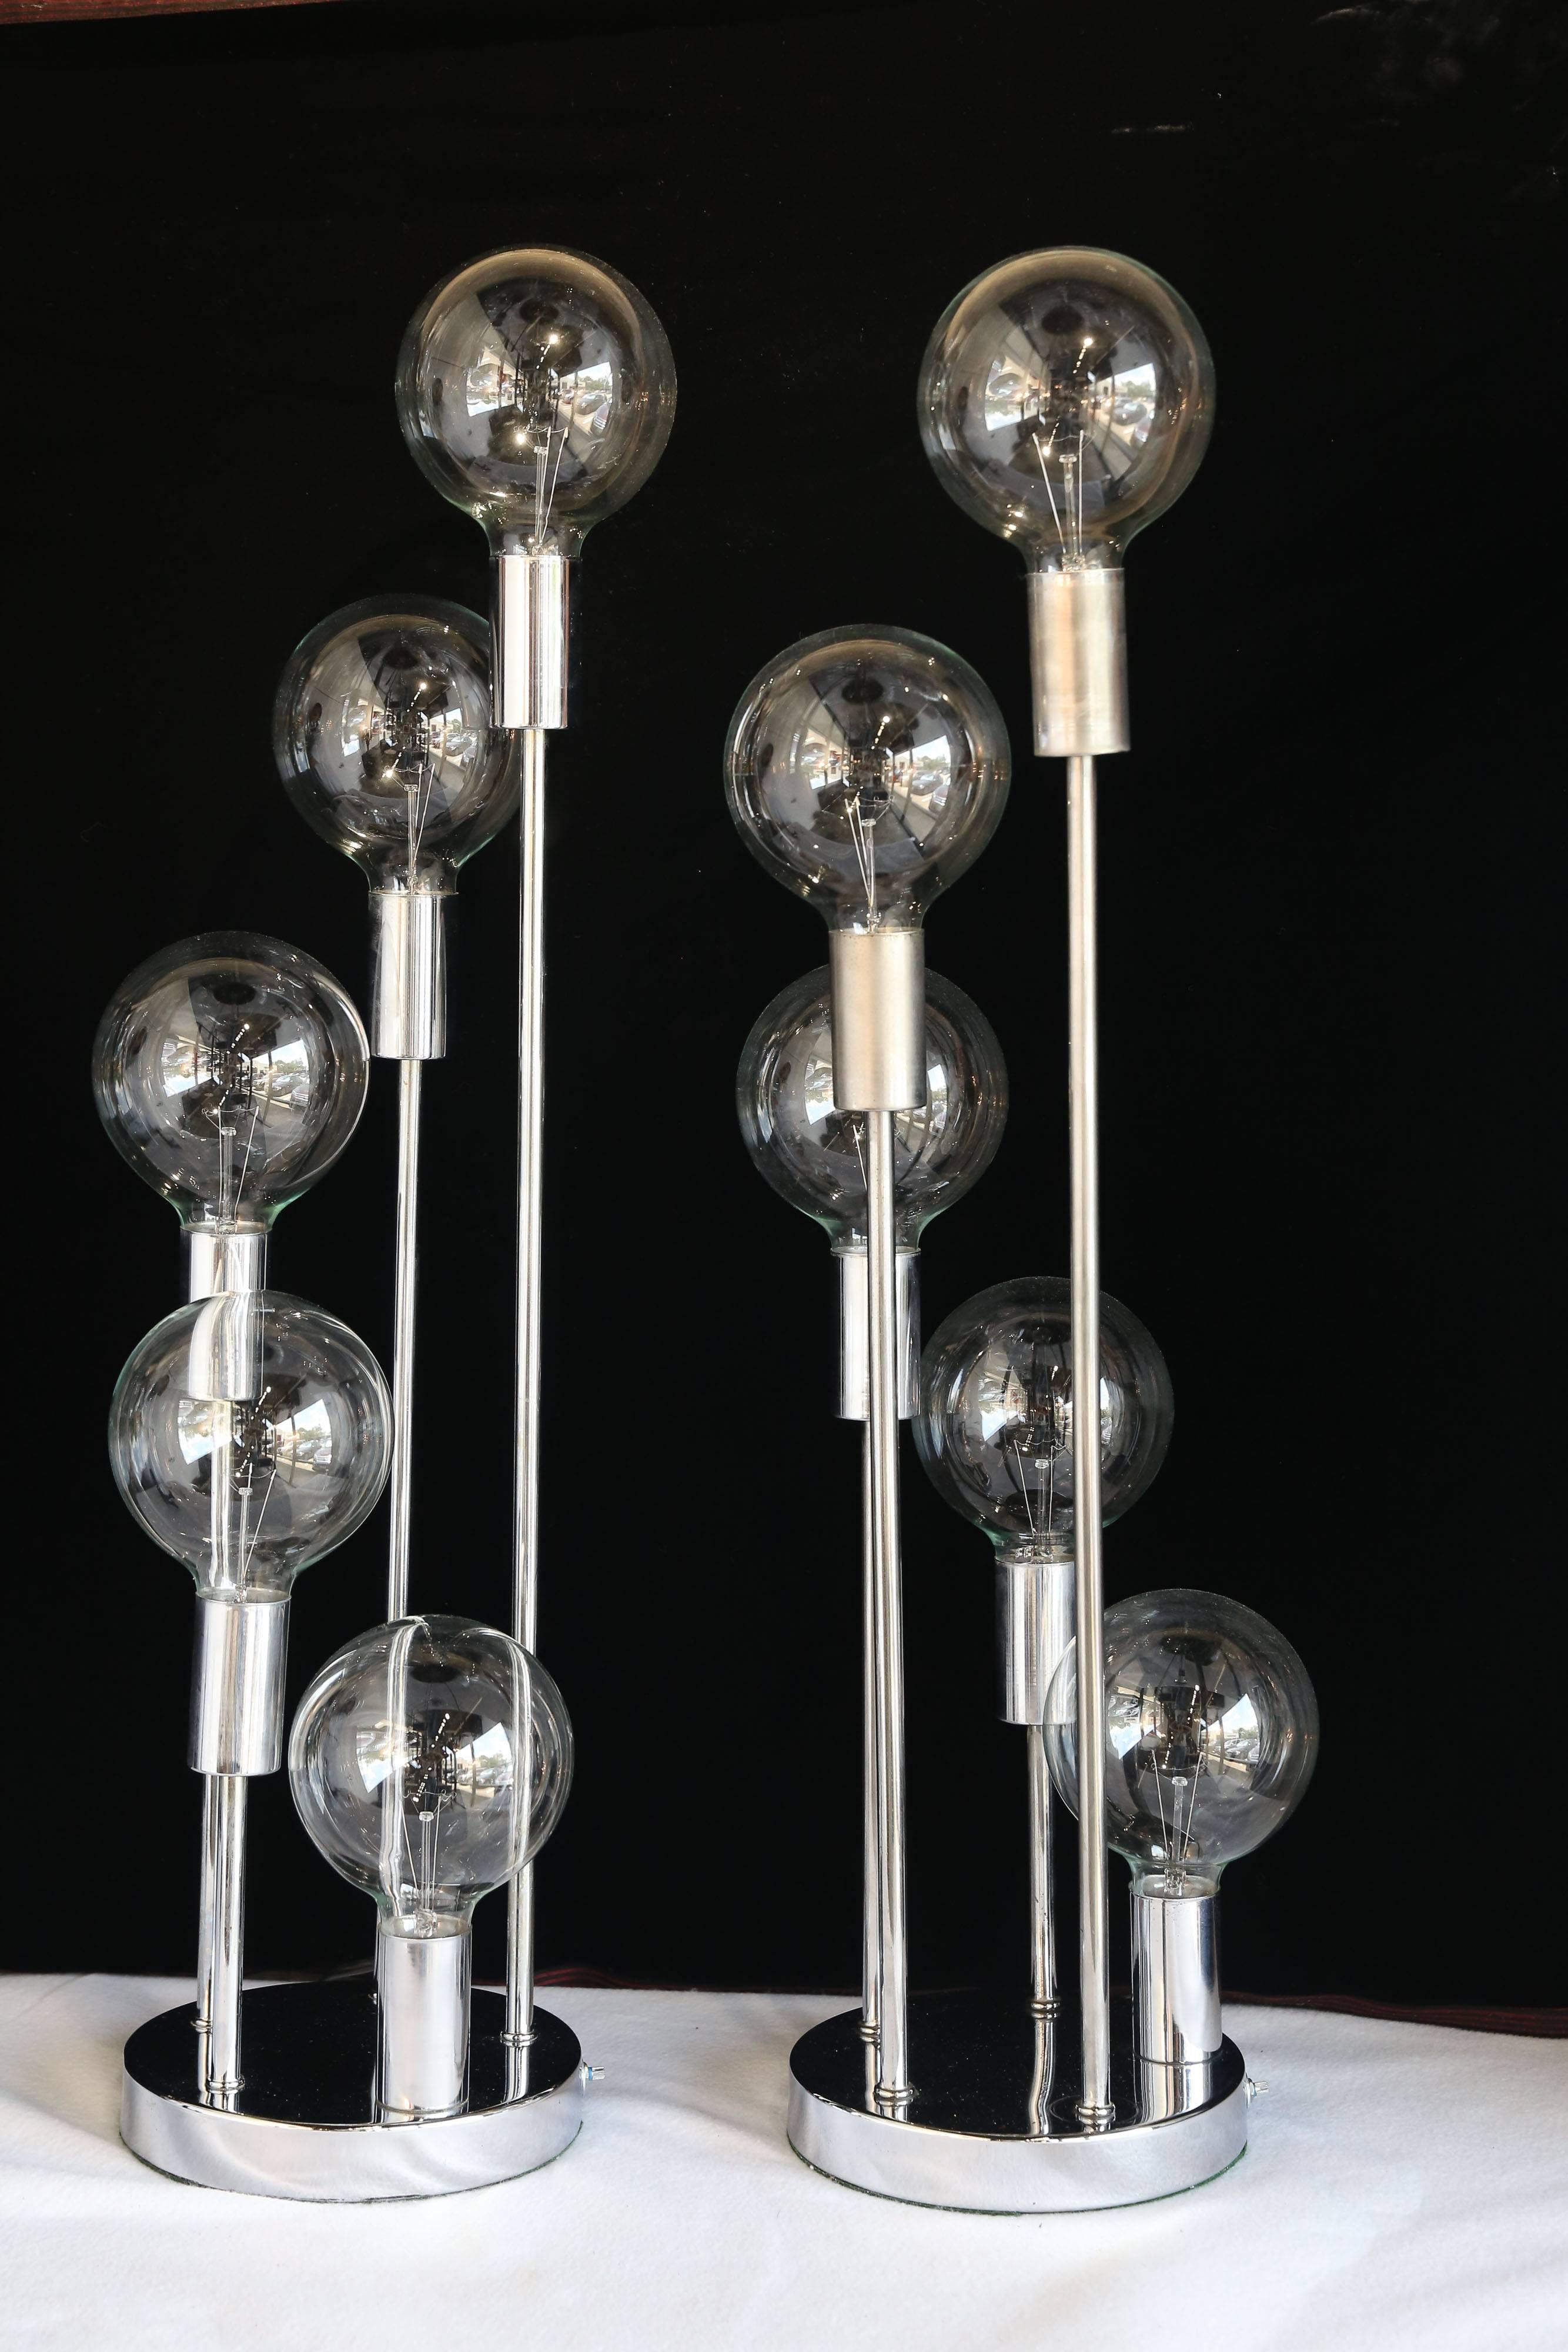 Perfect Mid-Century Modern chrome table lamps attributed to J. T. Kalmar. The lamps include five sockets (ball lamp shades of clear glass) spiraling in height to create a graceful curve. Signifying the future and the Atomic Age this lamp is most